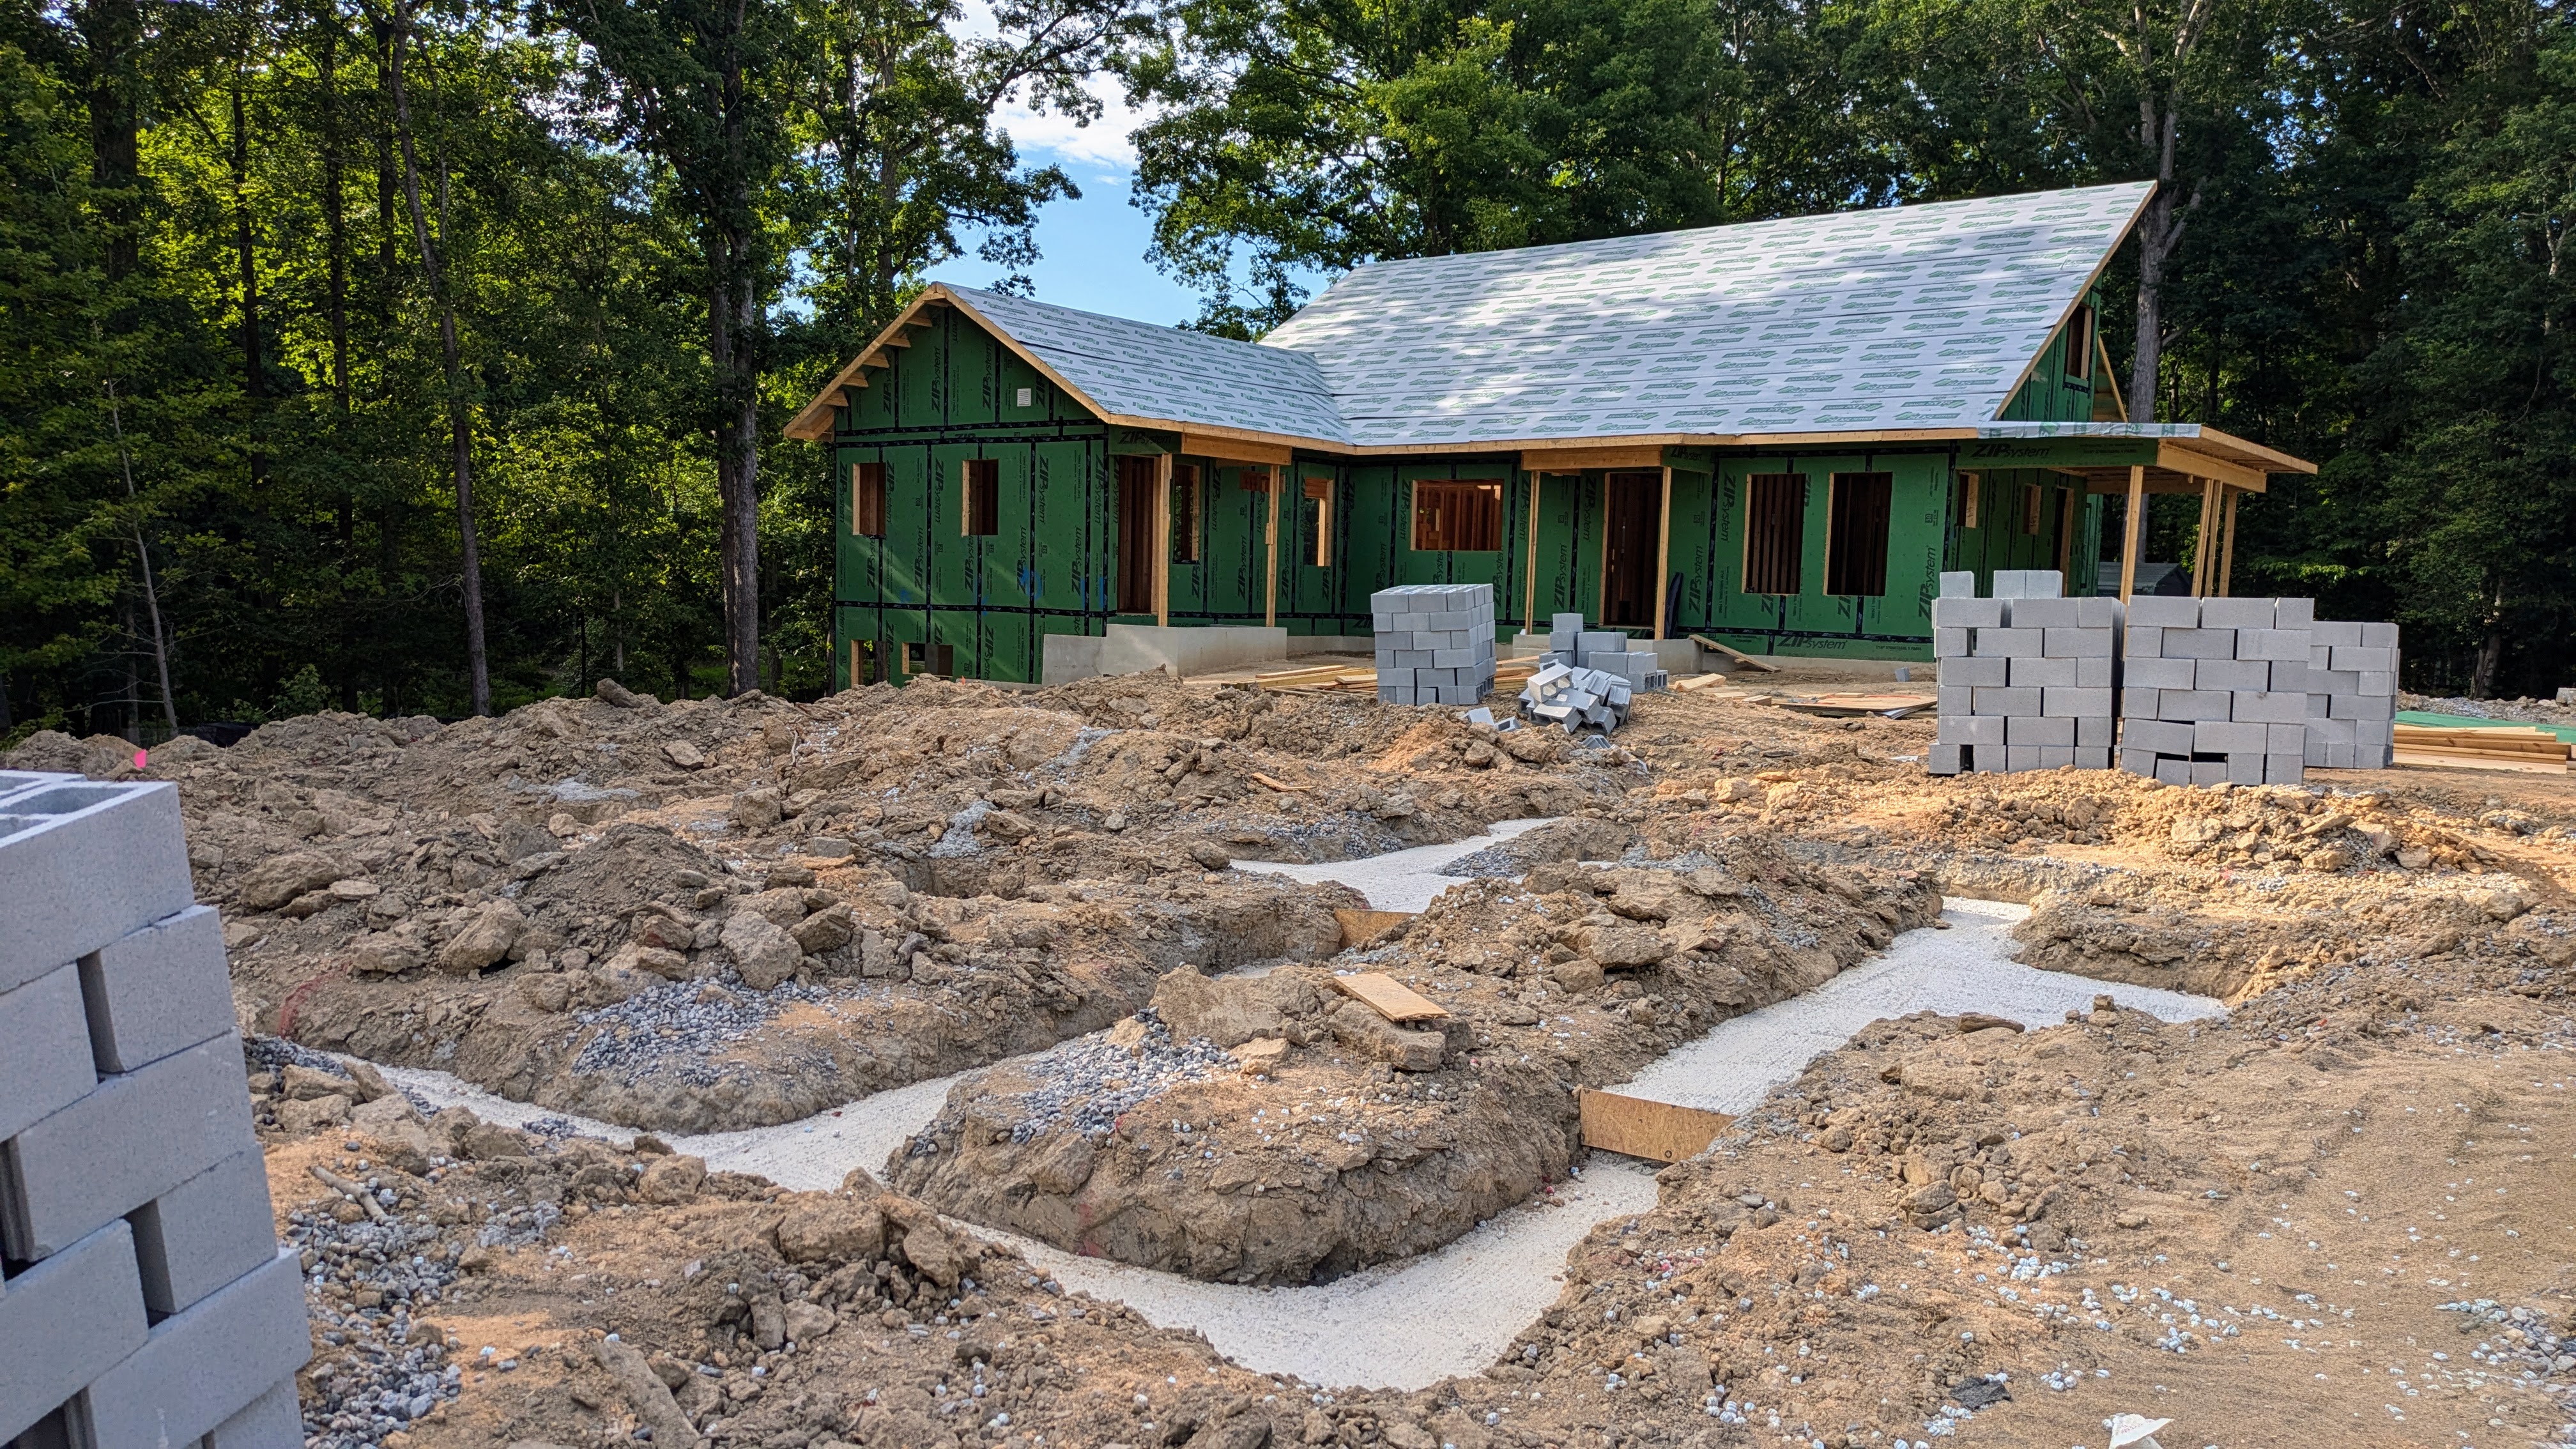 Framed house with Zip system siding and roof sheathing on in the background, concrete foundation and dirt with stacks of blocks for another home foundation in the foreground, surrounded by trees. 